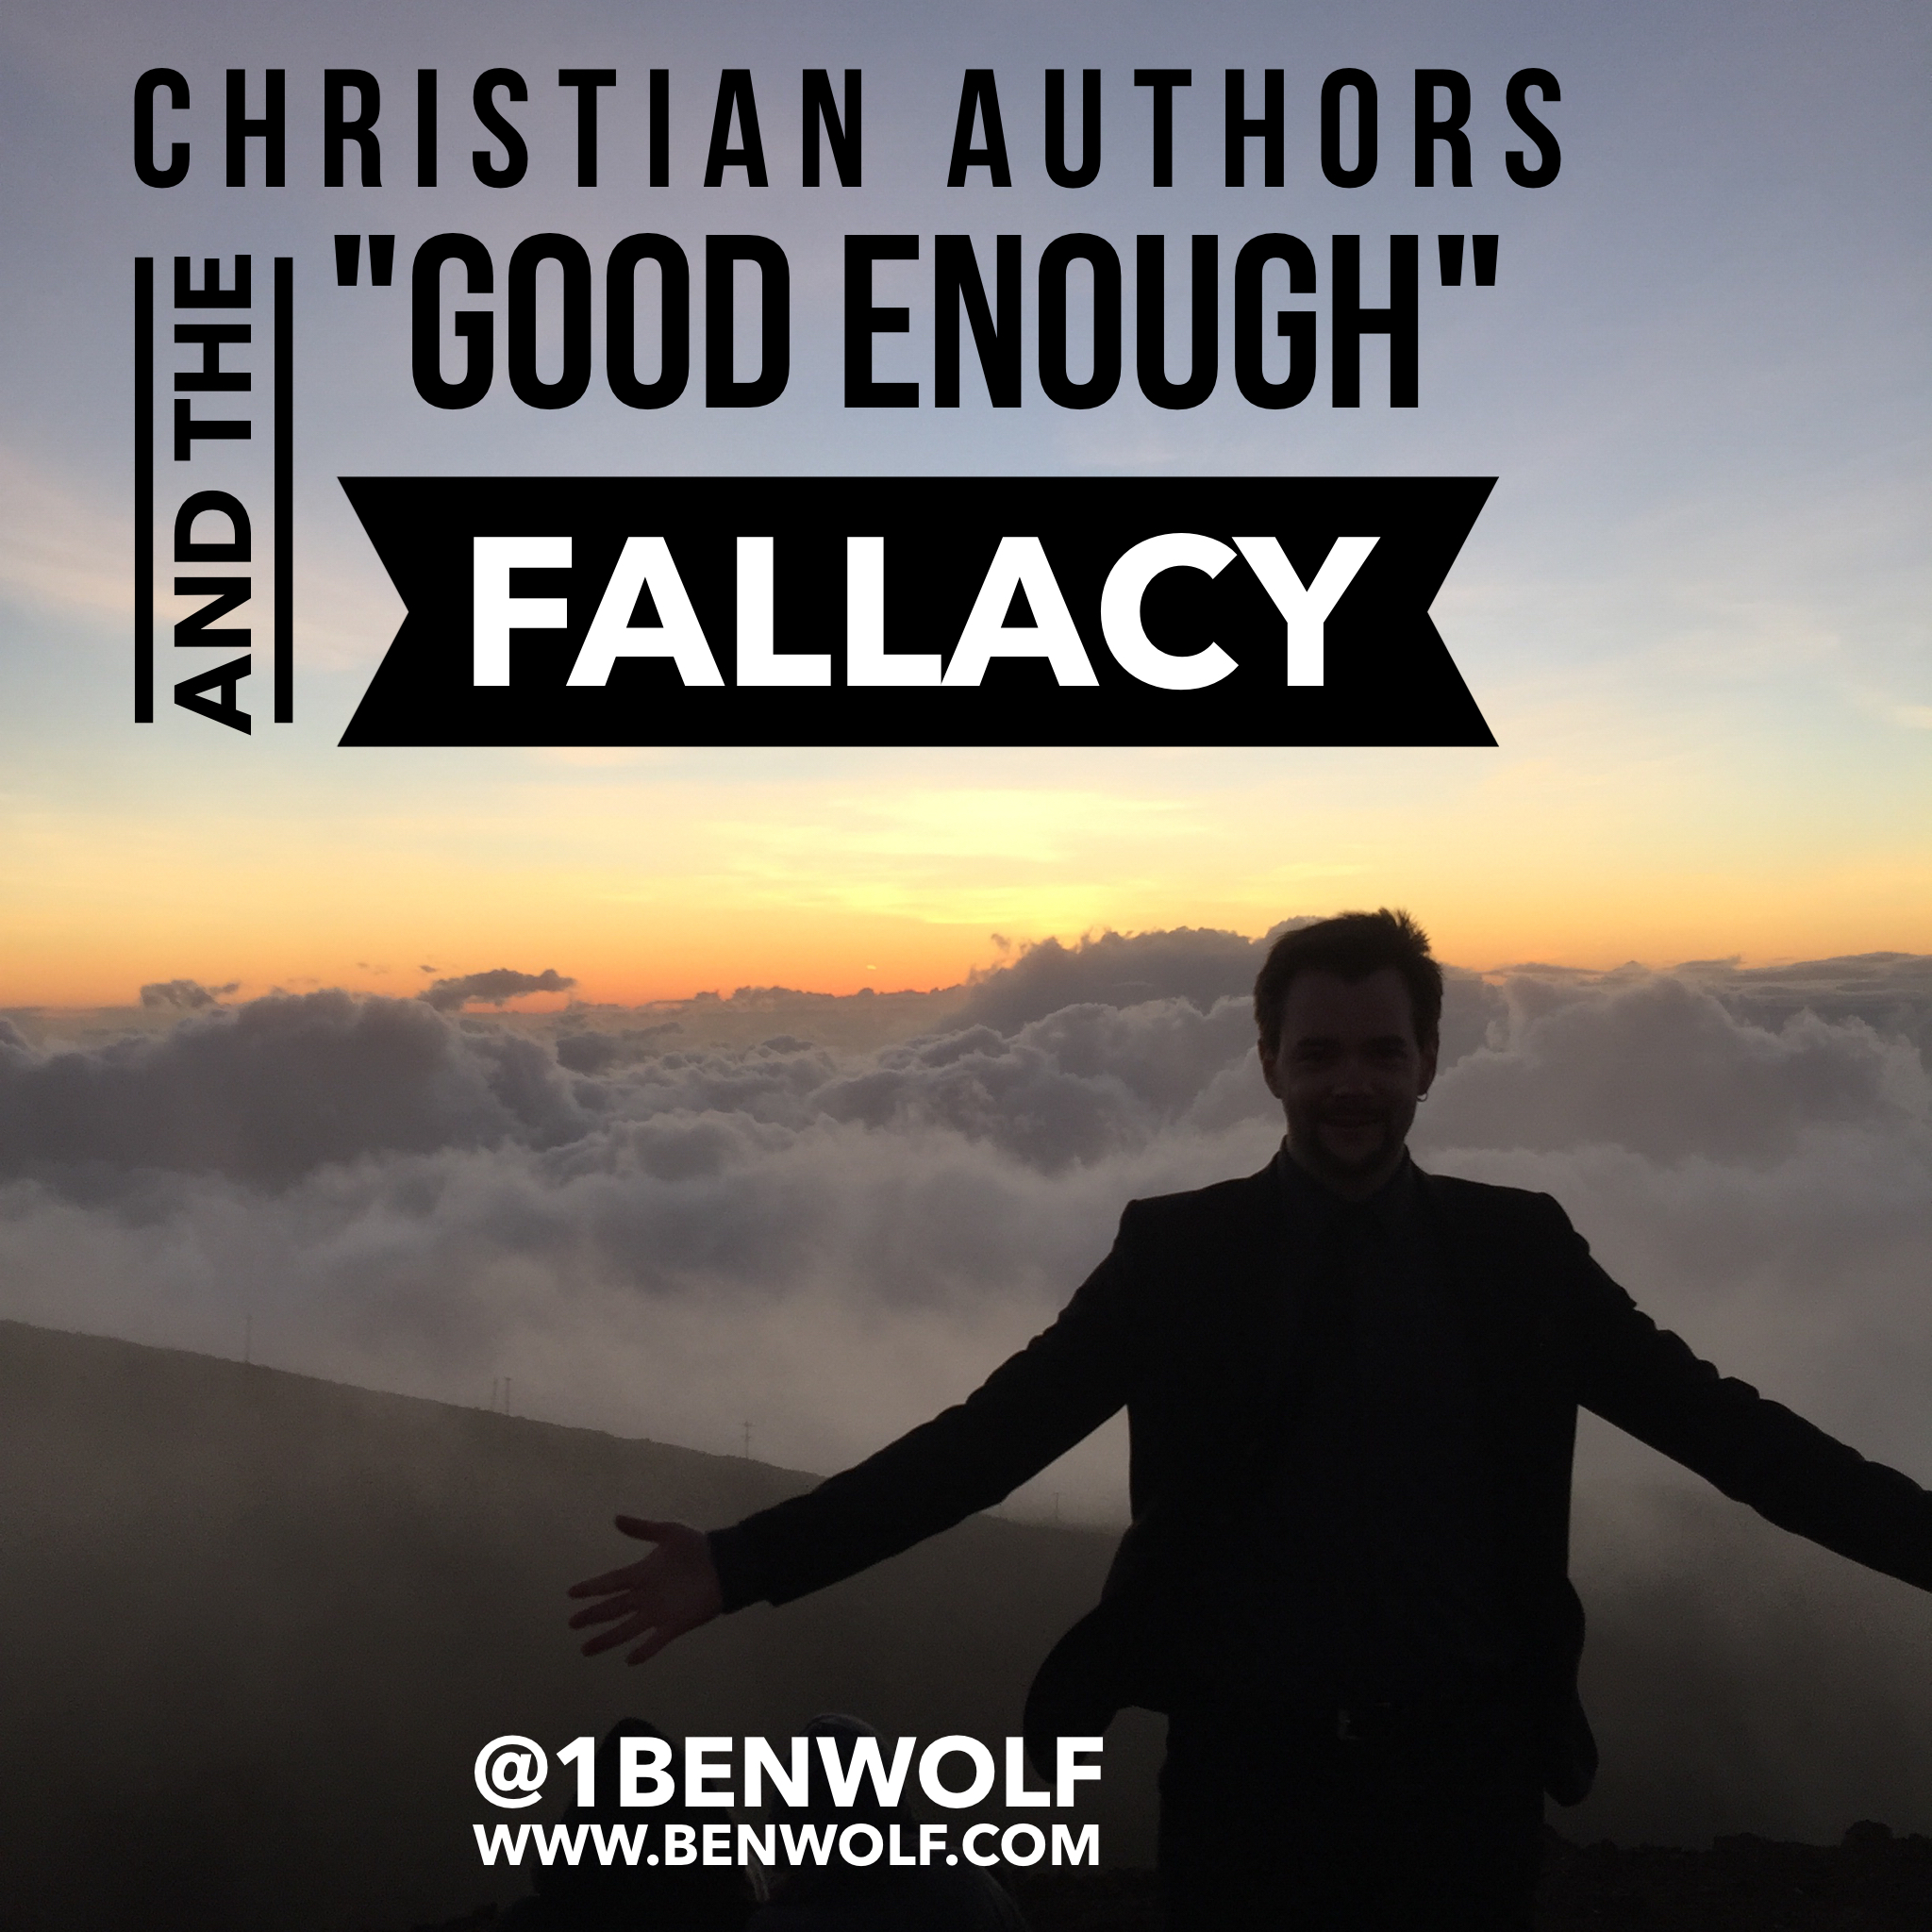 Christian Authors and the “Good Enough” Fallacy